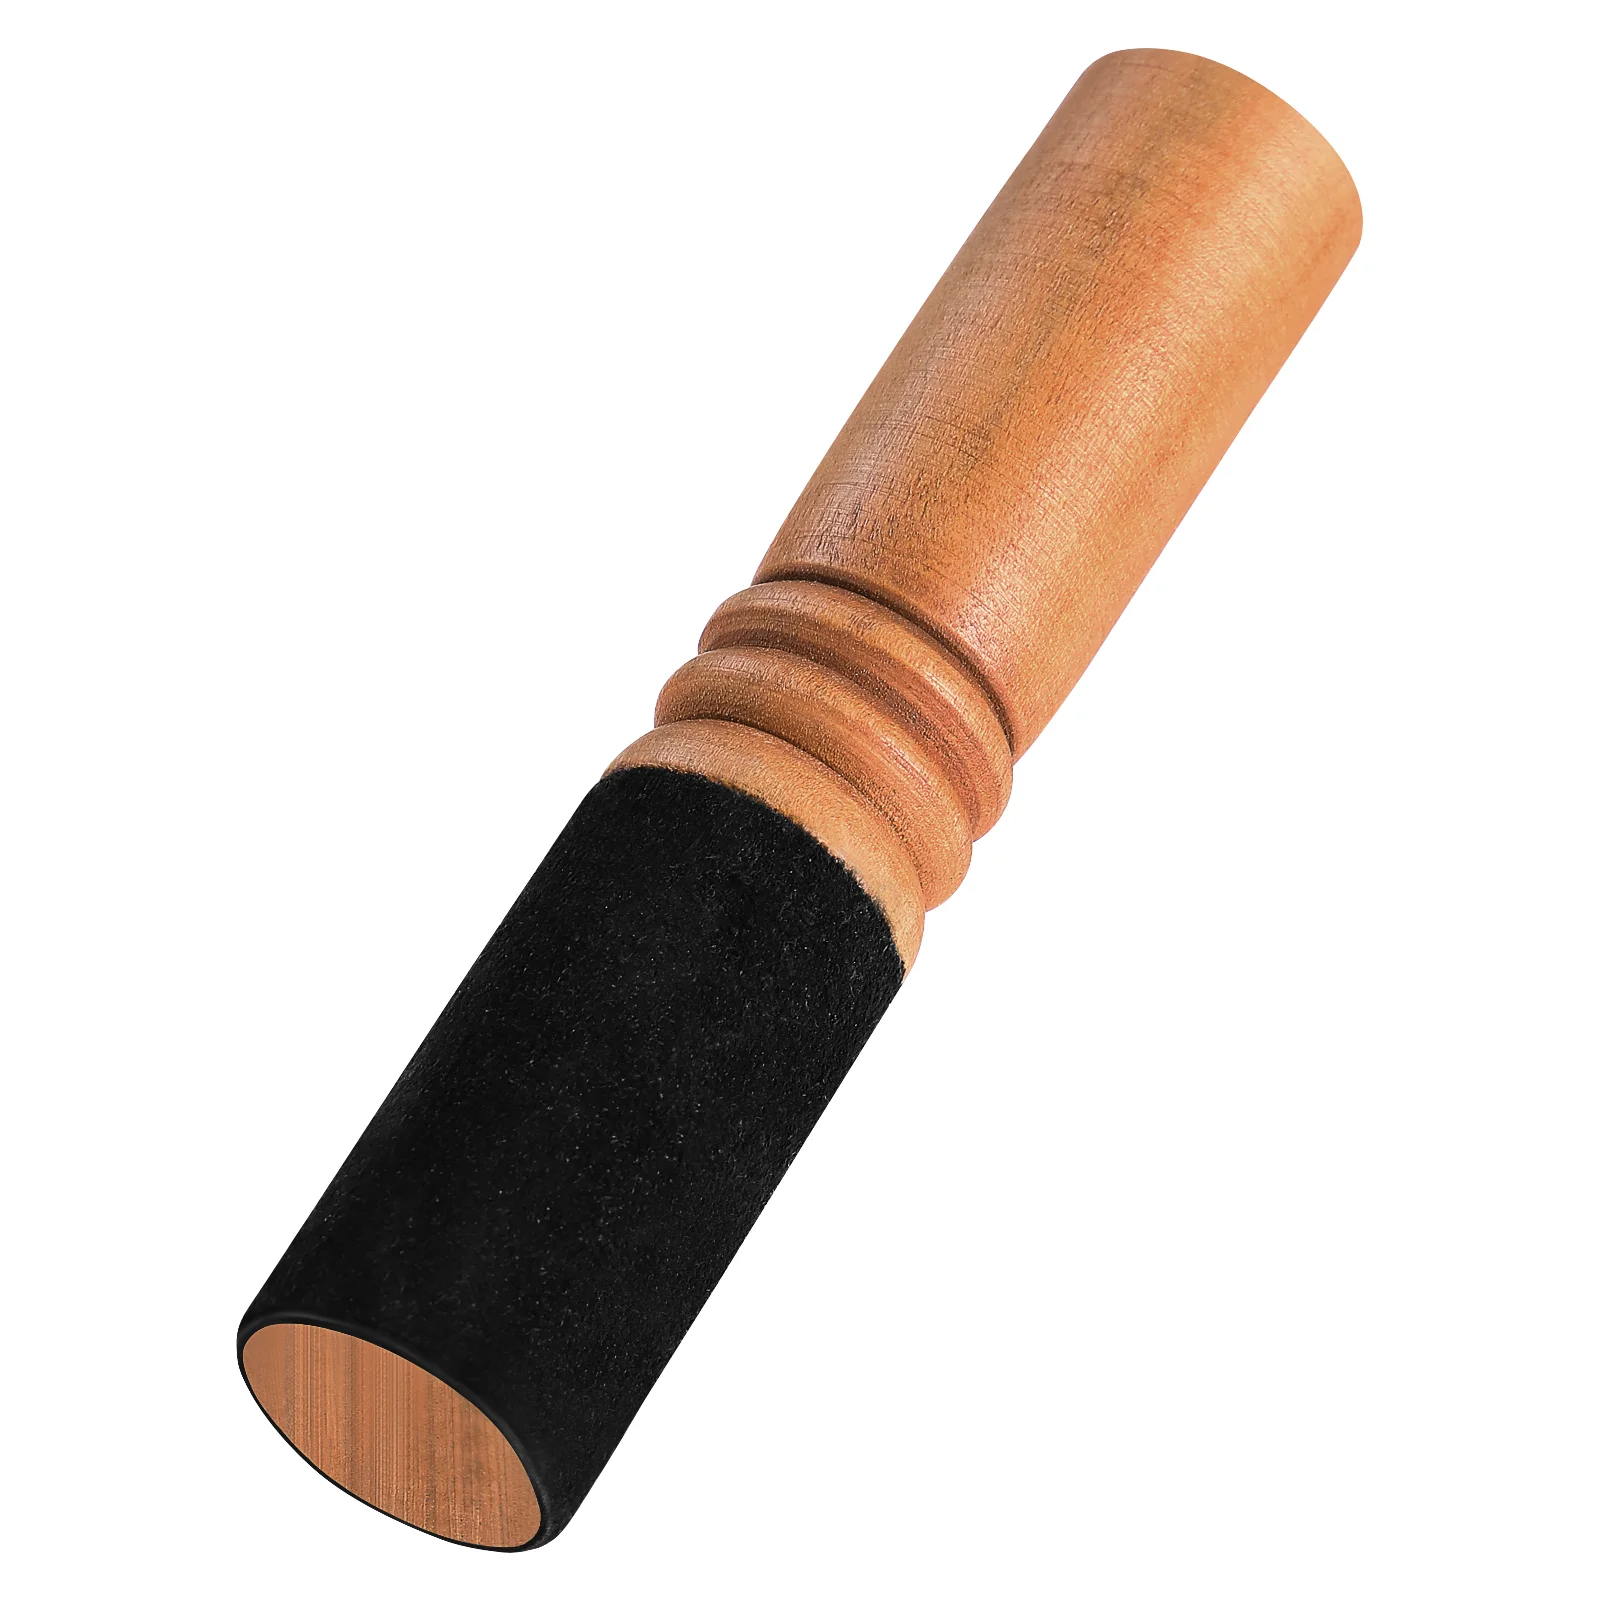 

Singing Bowl Stick Mallet Buddha Sound Accessory Knocking Rods Chanting Bowls Striker Wooden Yoga Accessories